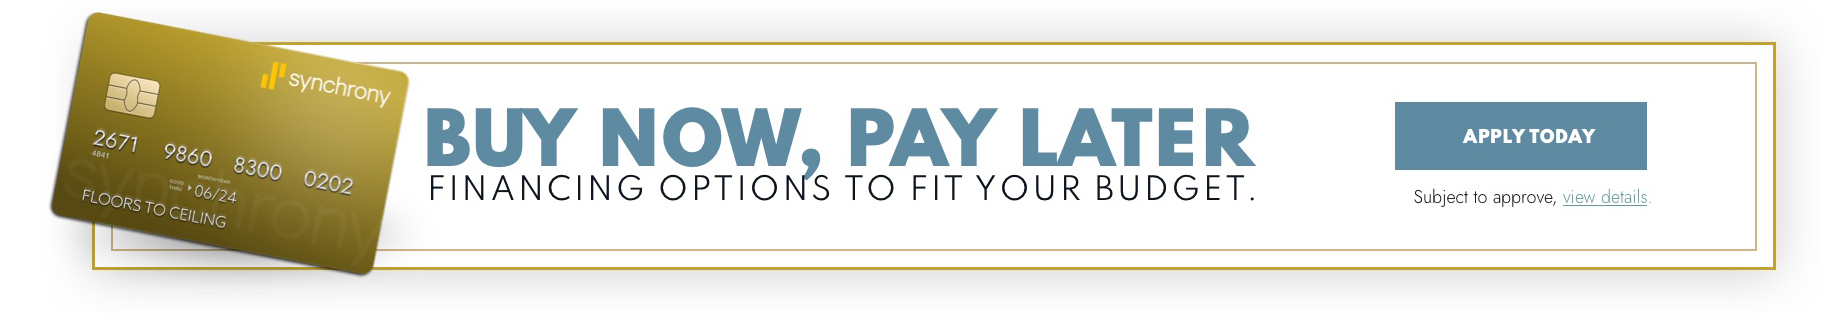 Buy now pay later | Floor to Ceiling - Mitchell